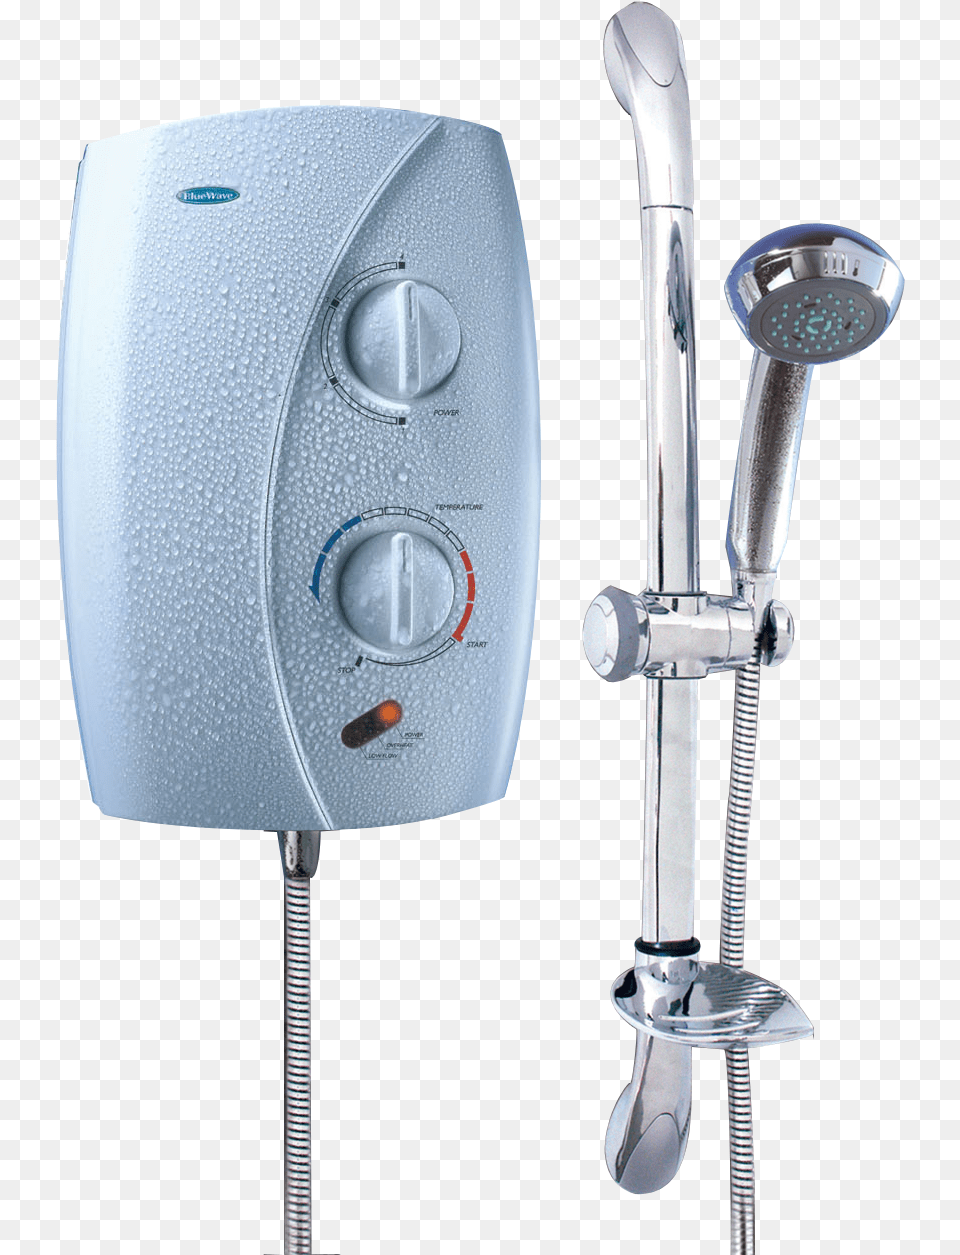 Bluewave 301 E Shower Heater Shower Heater Price Philippines, Indoors, Bathroom, Room, Shower Faucet Free Transparent Png